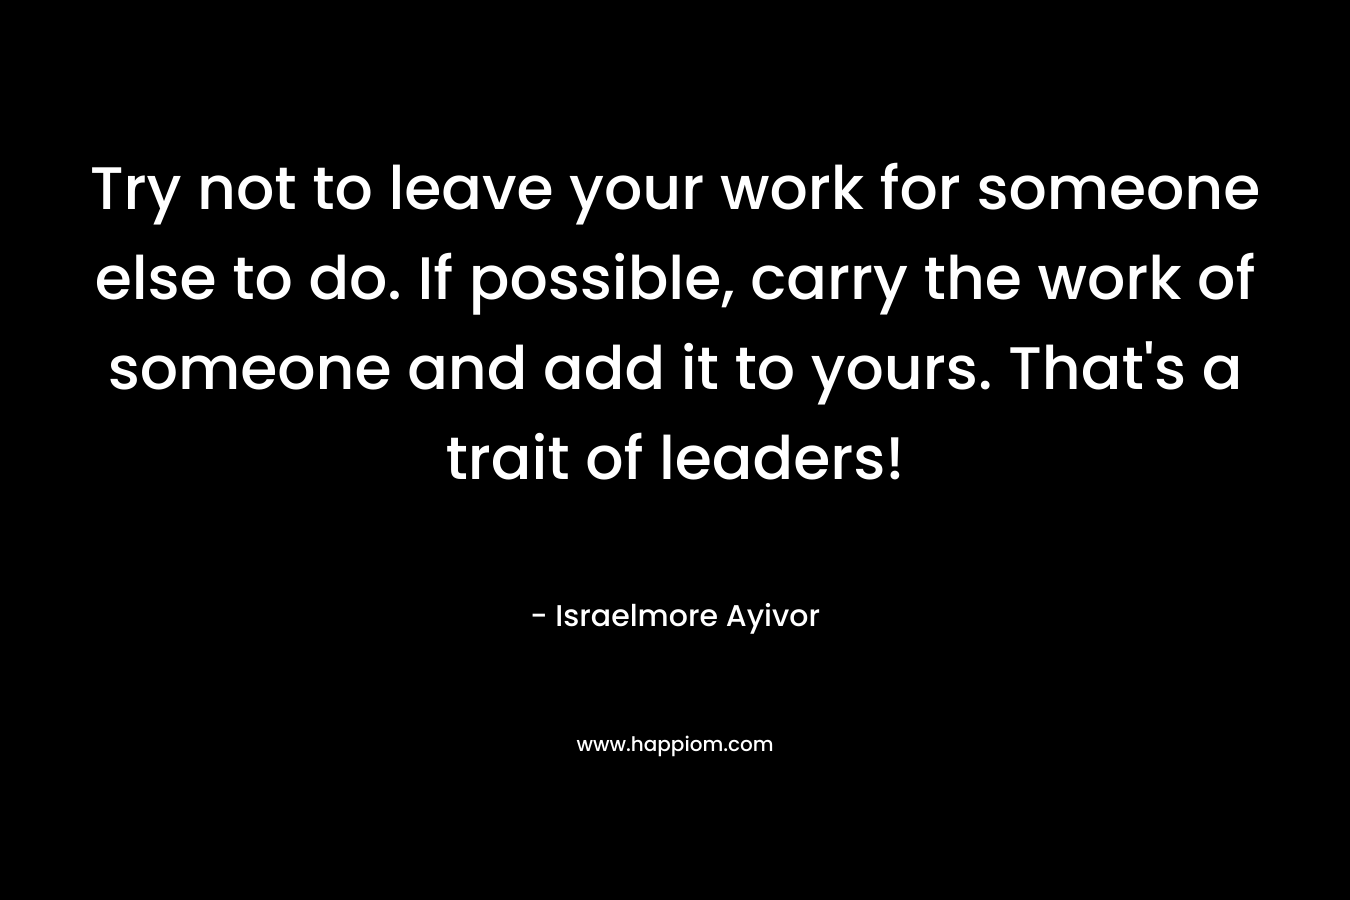 Try not to leave your work for someone else to do. If possible, carry the work of someone and add it to yours. That's a trait of leaders!